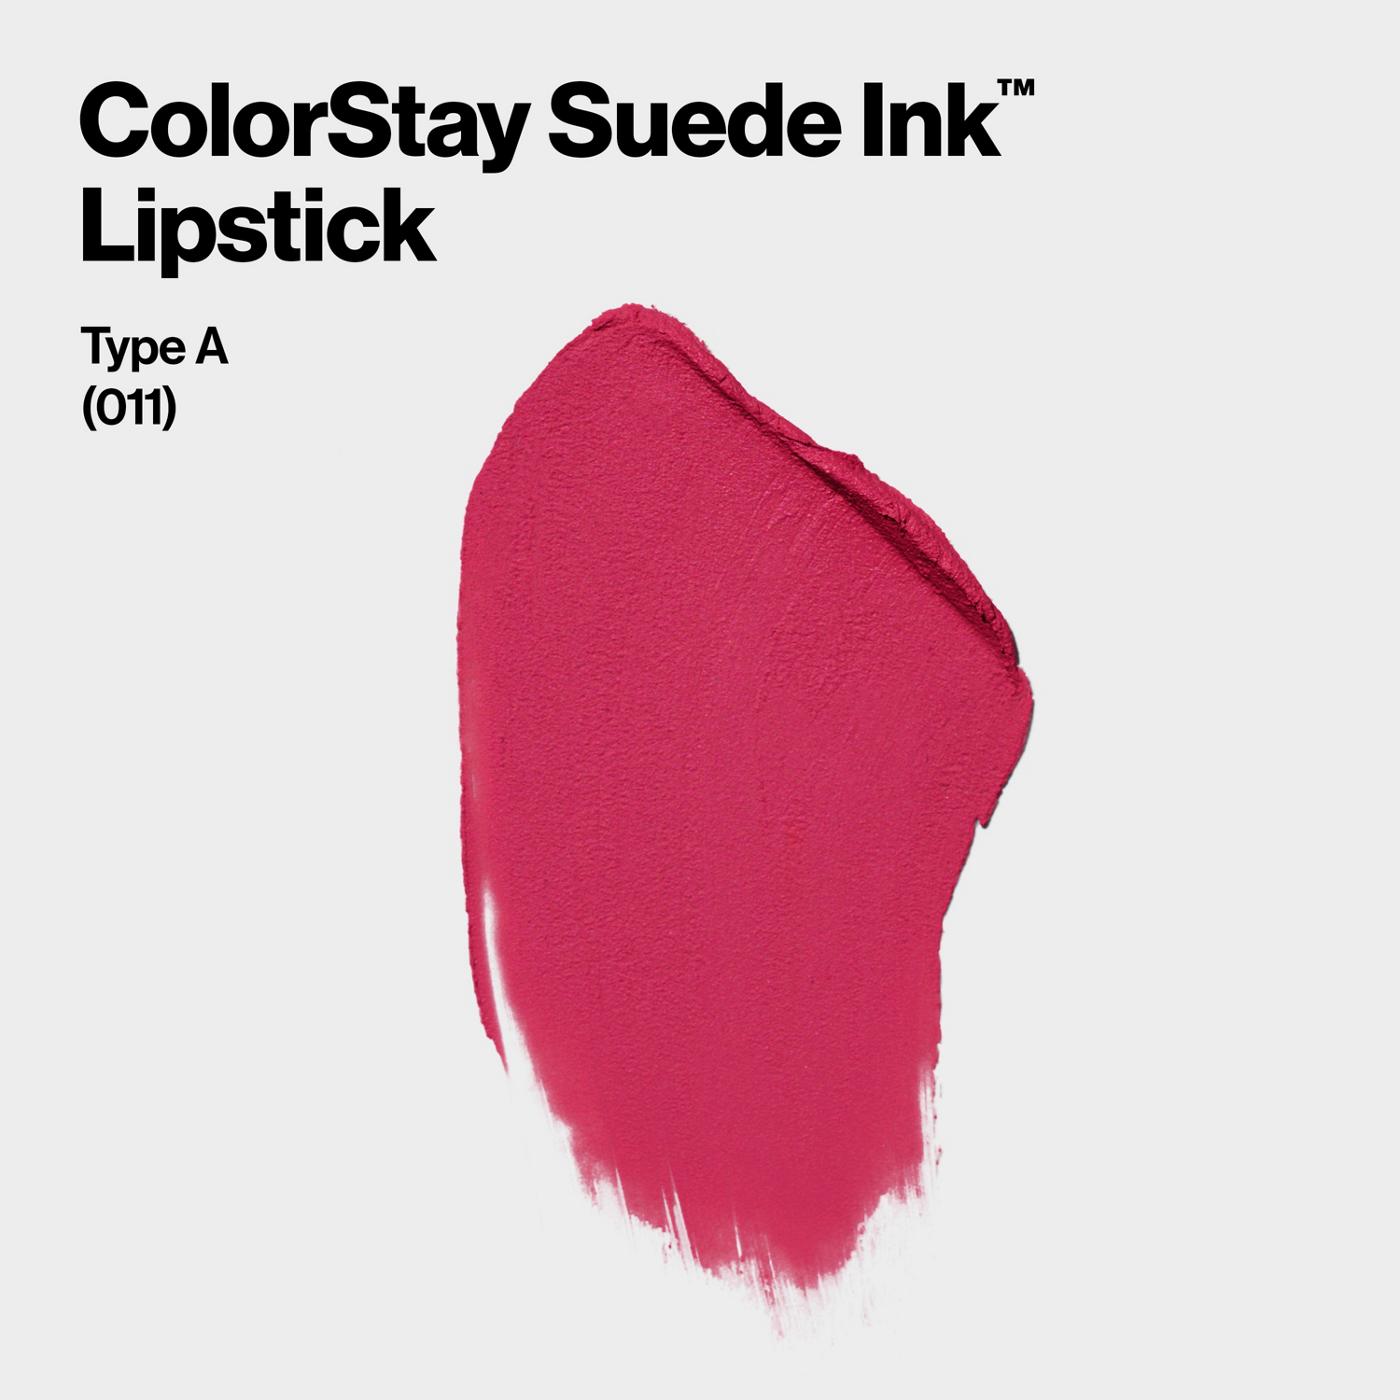 Revlon ColorStay Suede Ink Lipstick - Type A; image 4 of 5